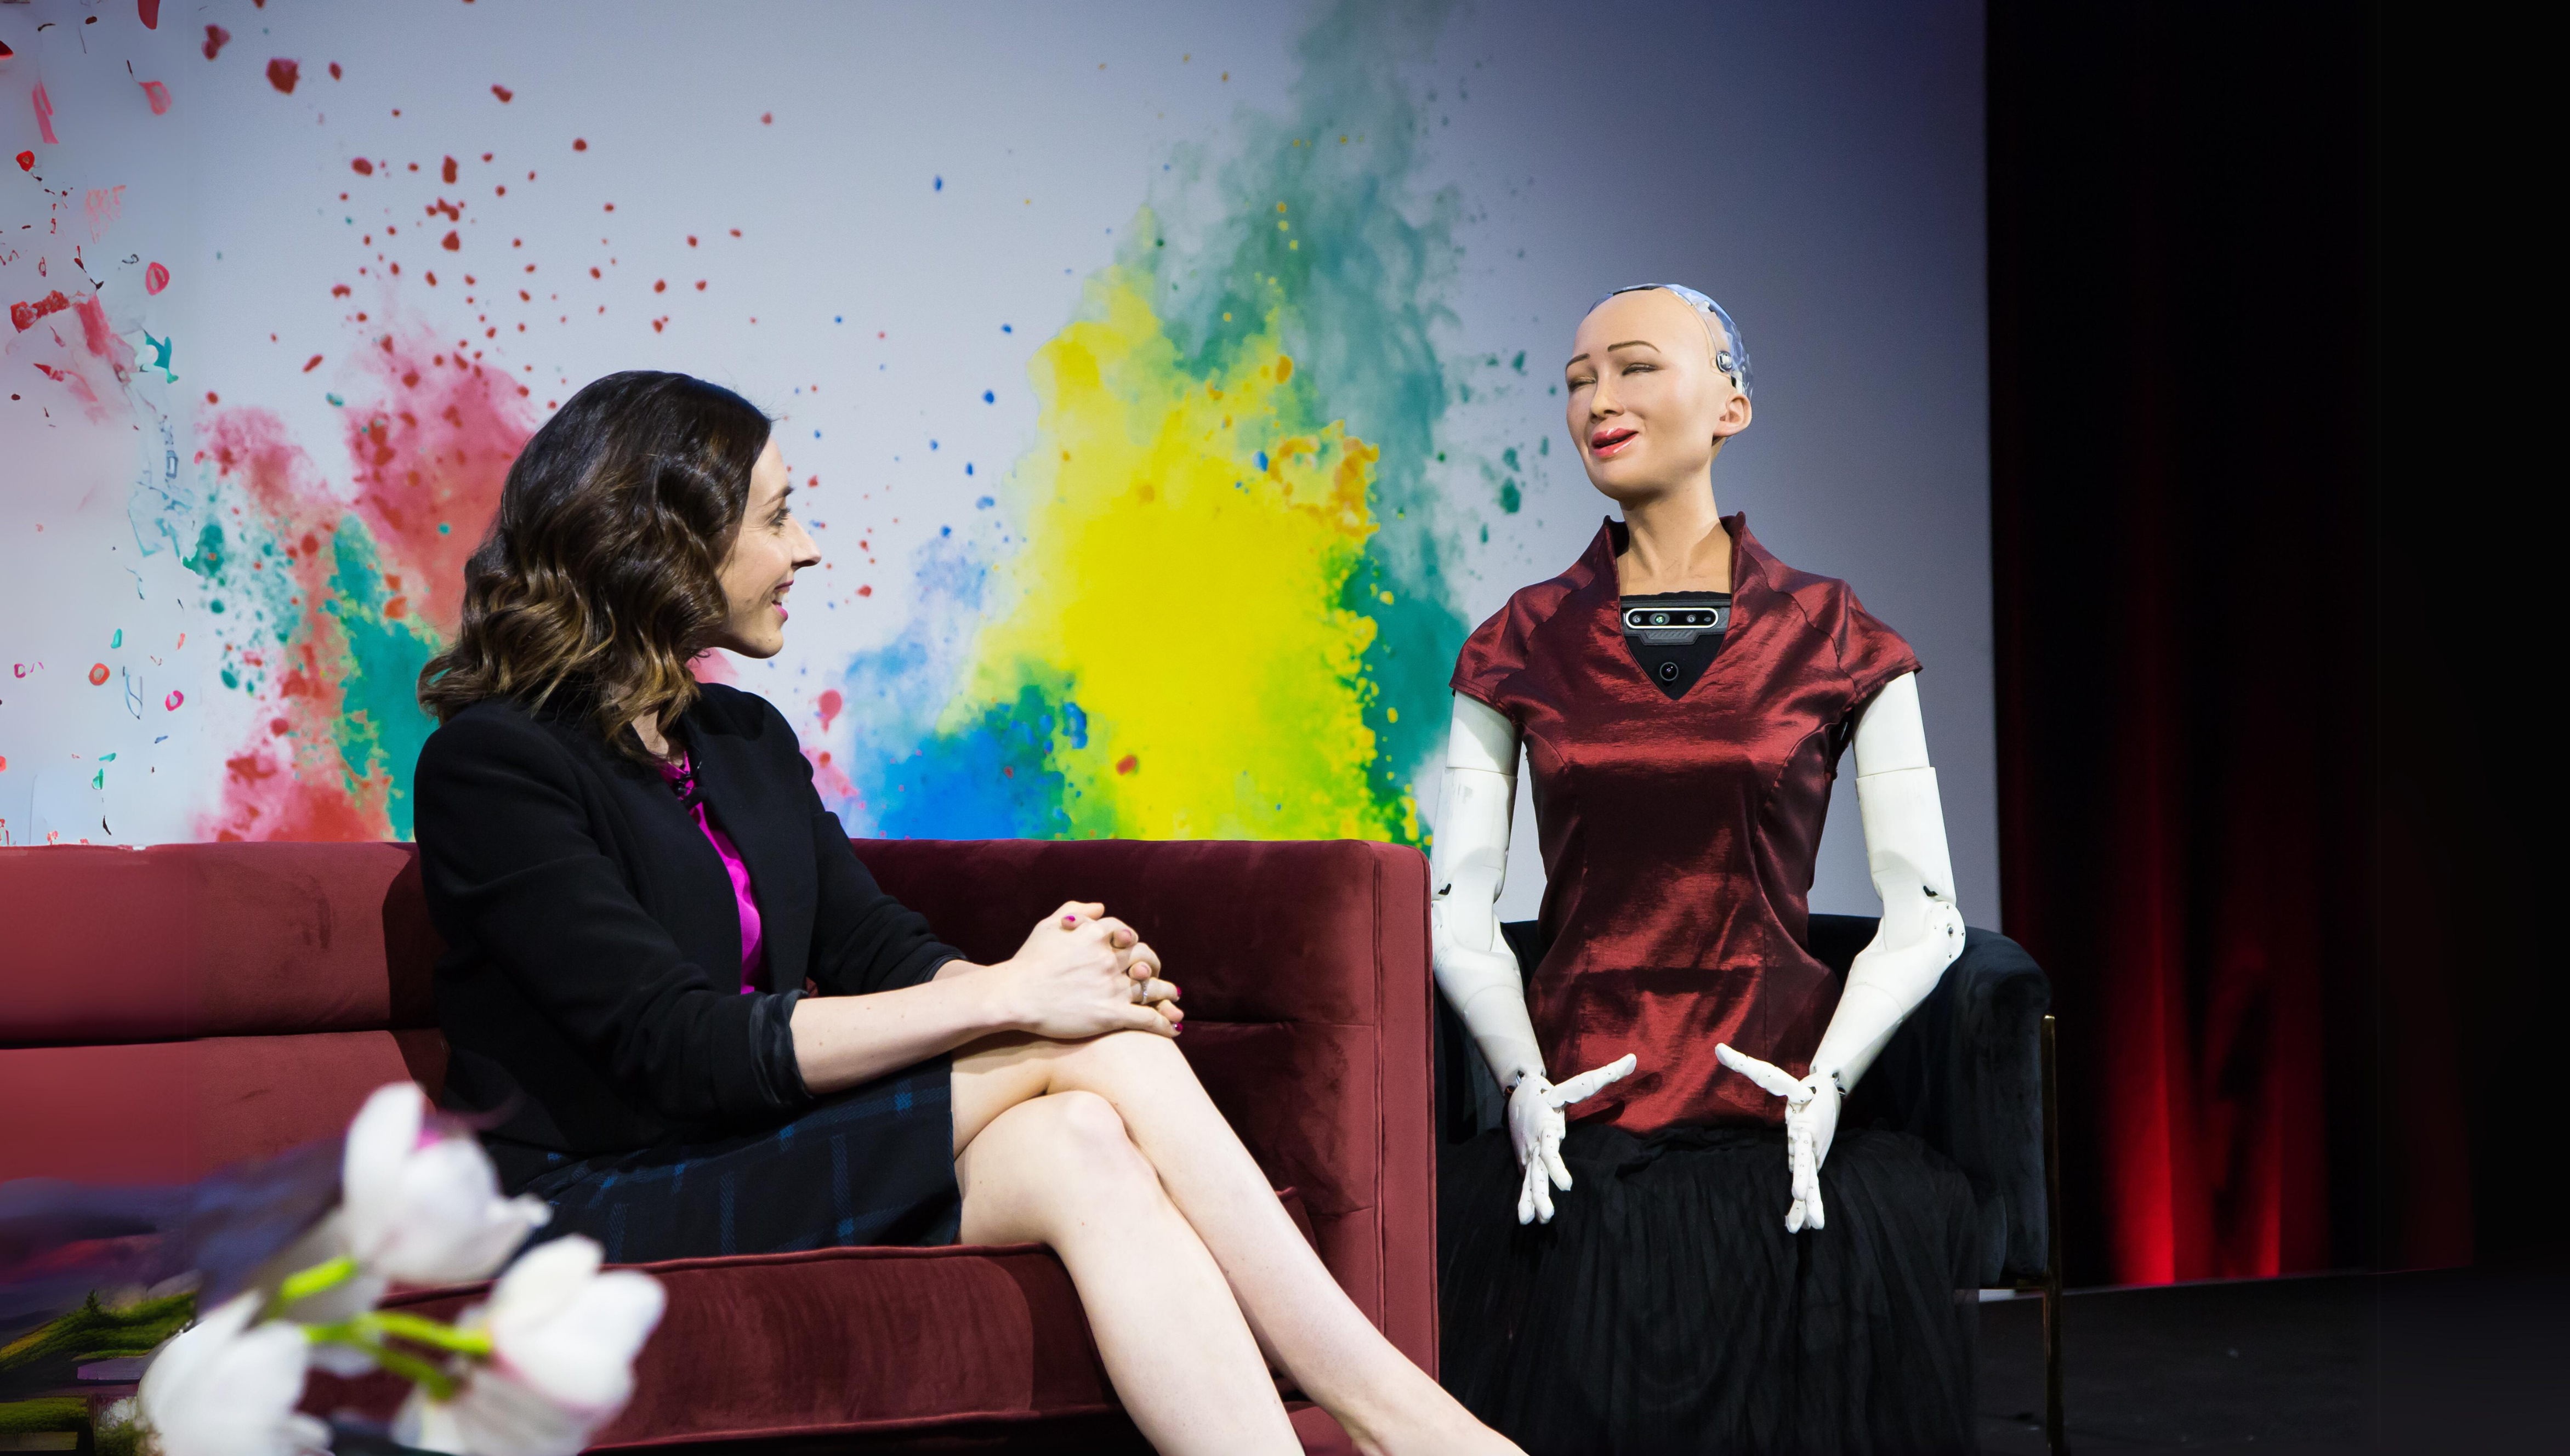 Holly Ransom interviewing Sophia - the world's first humanoid robot